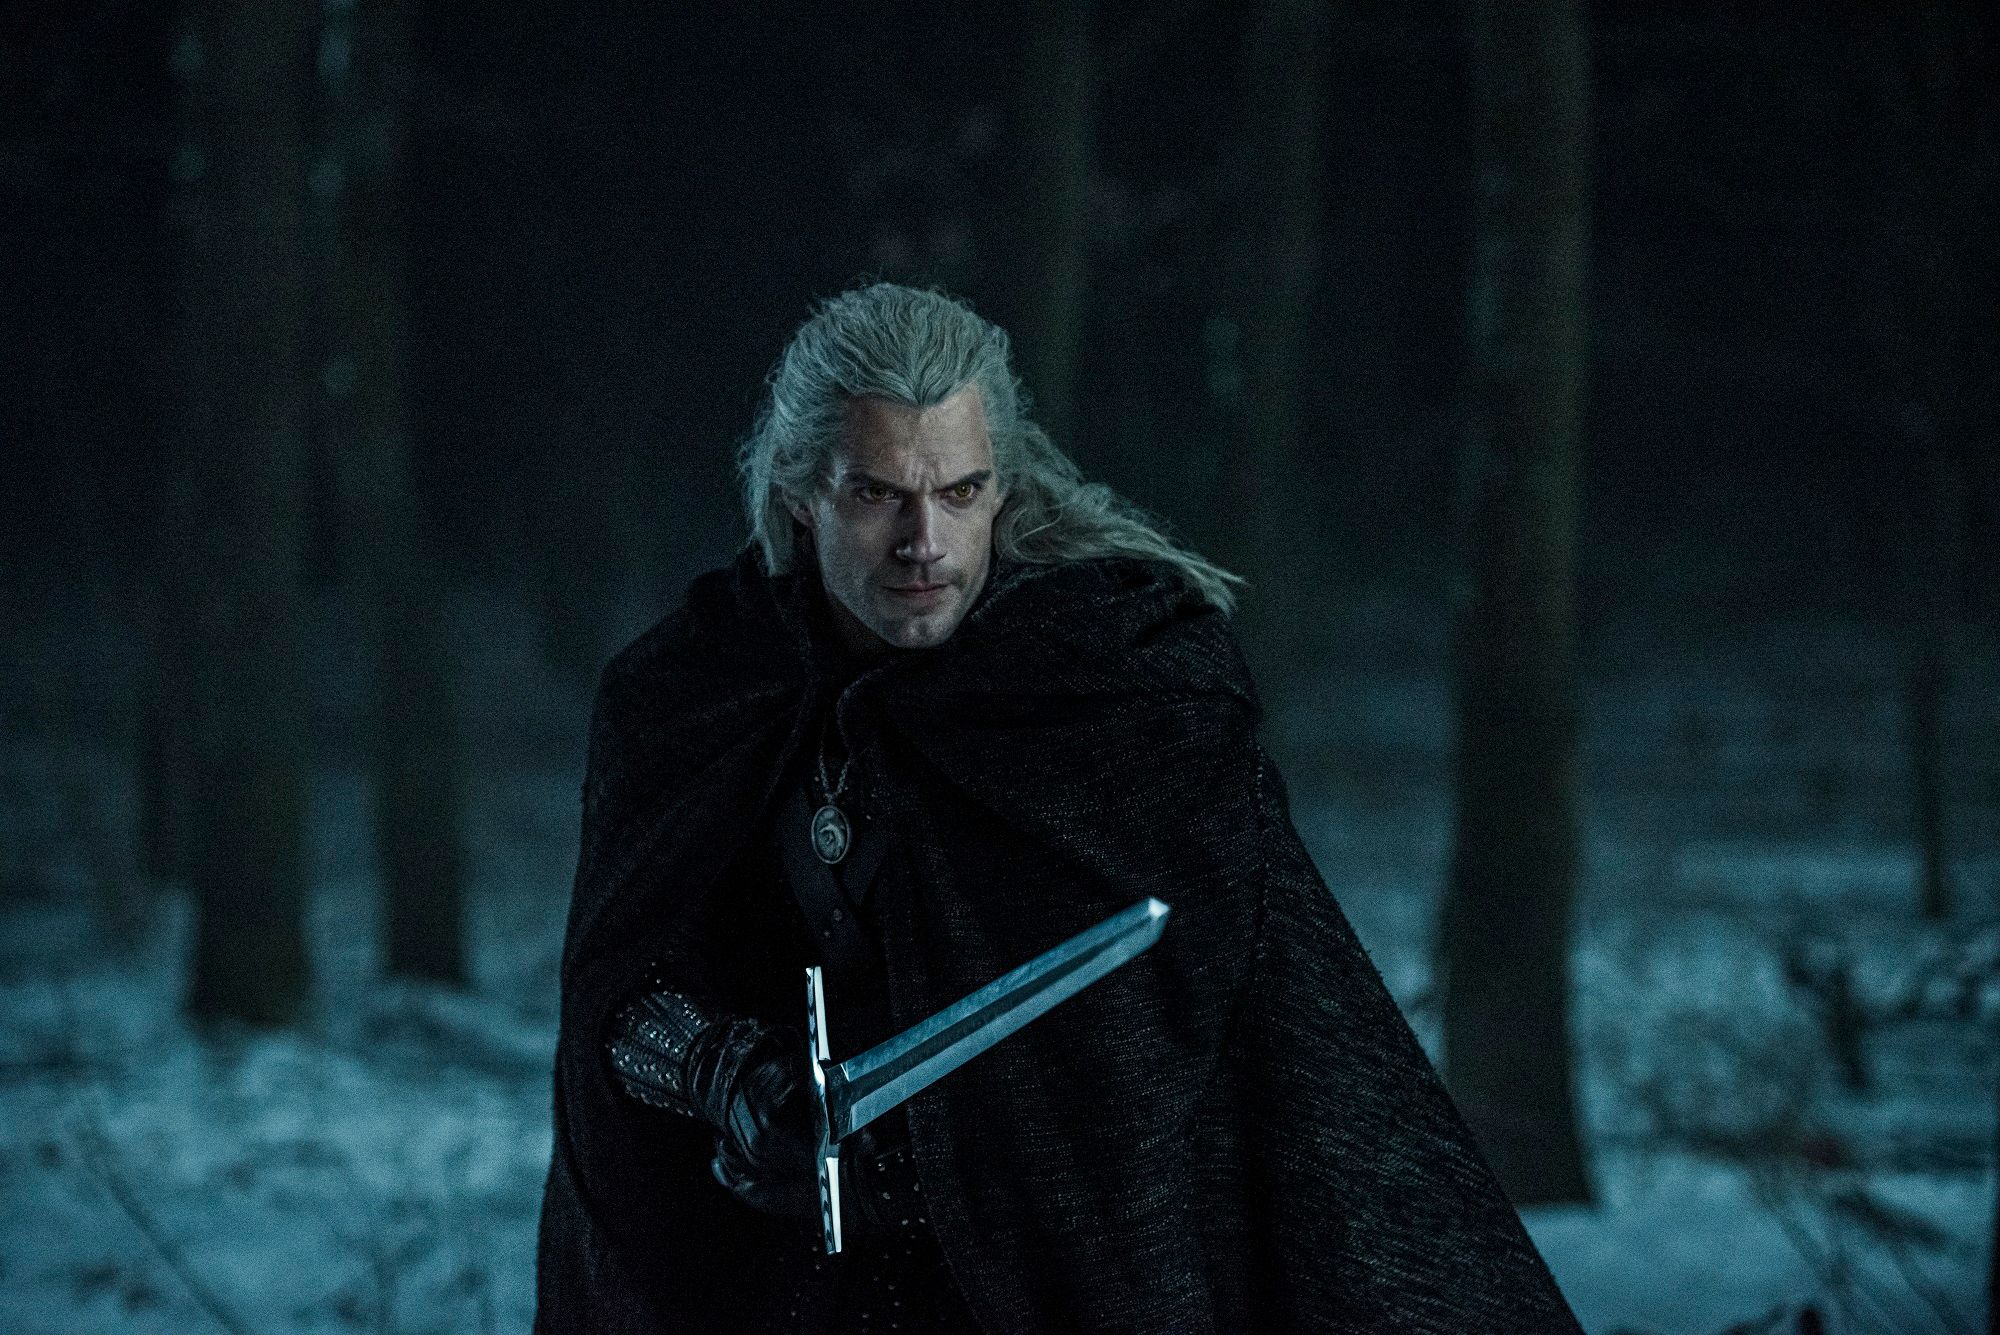 IMDb - Here's your first look at Henry Cavill as monster hunter Geralt of  Rivia in #TheWitcher from Netflix.